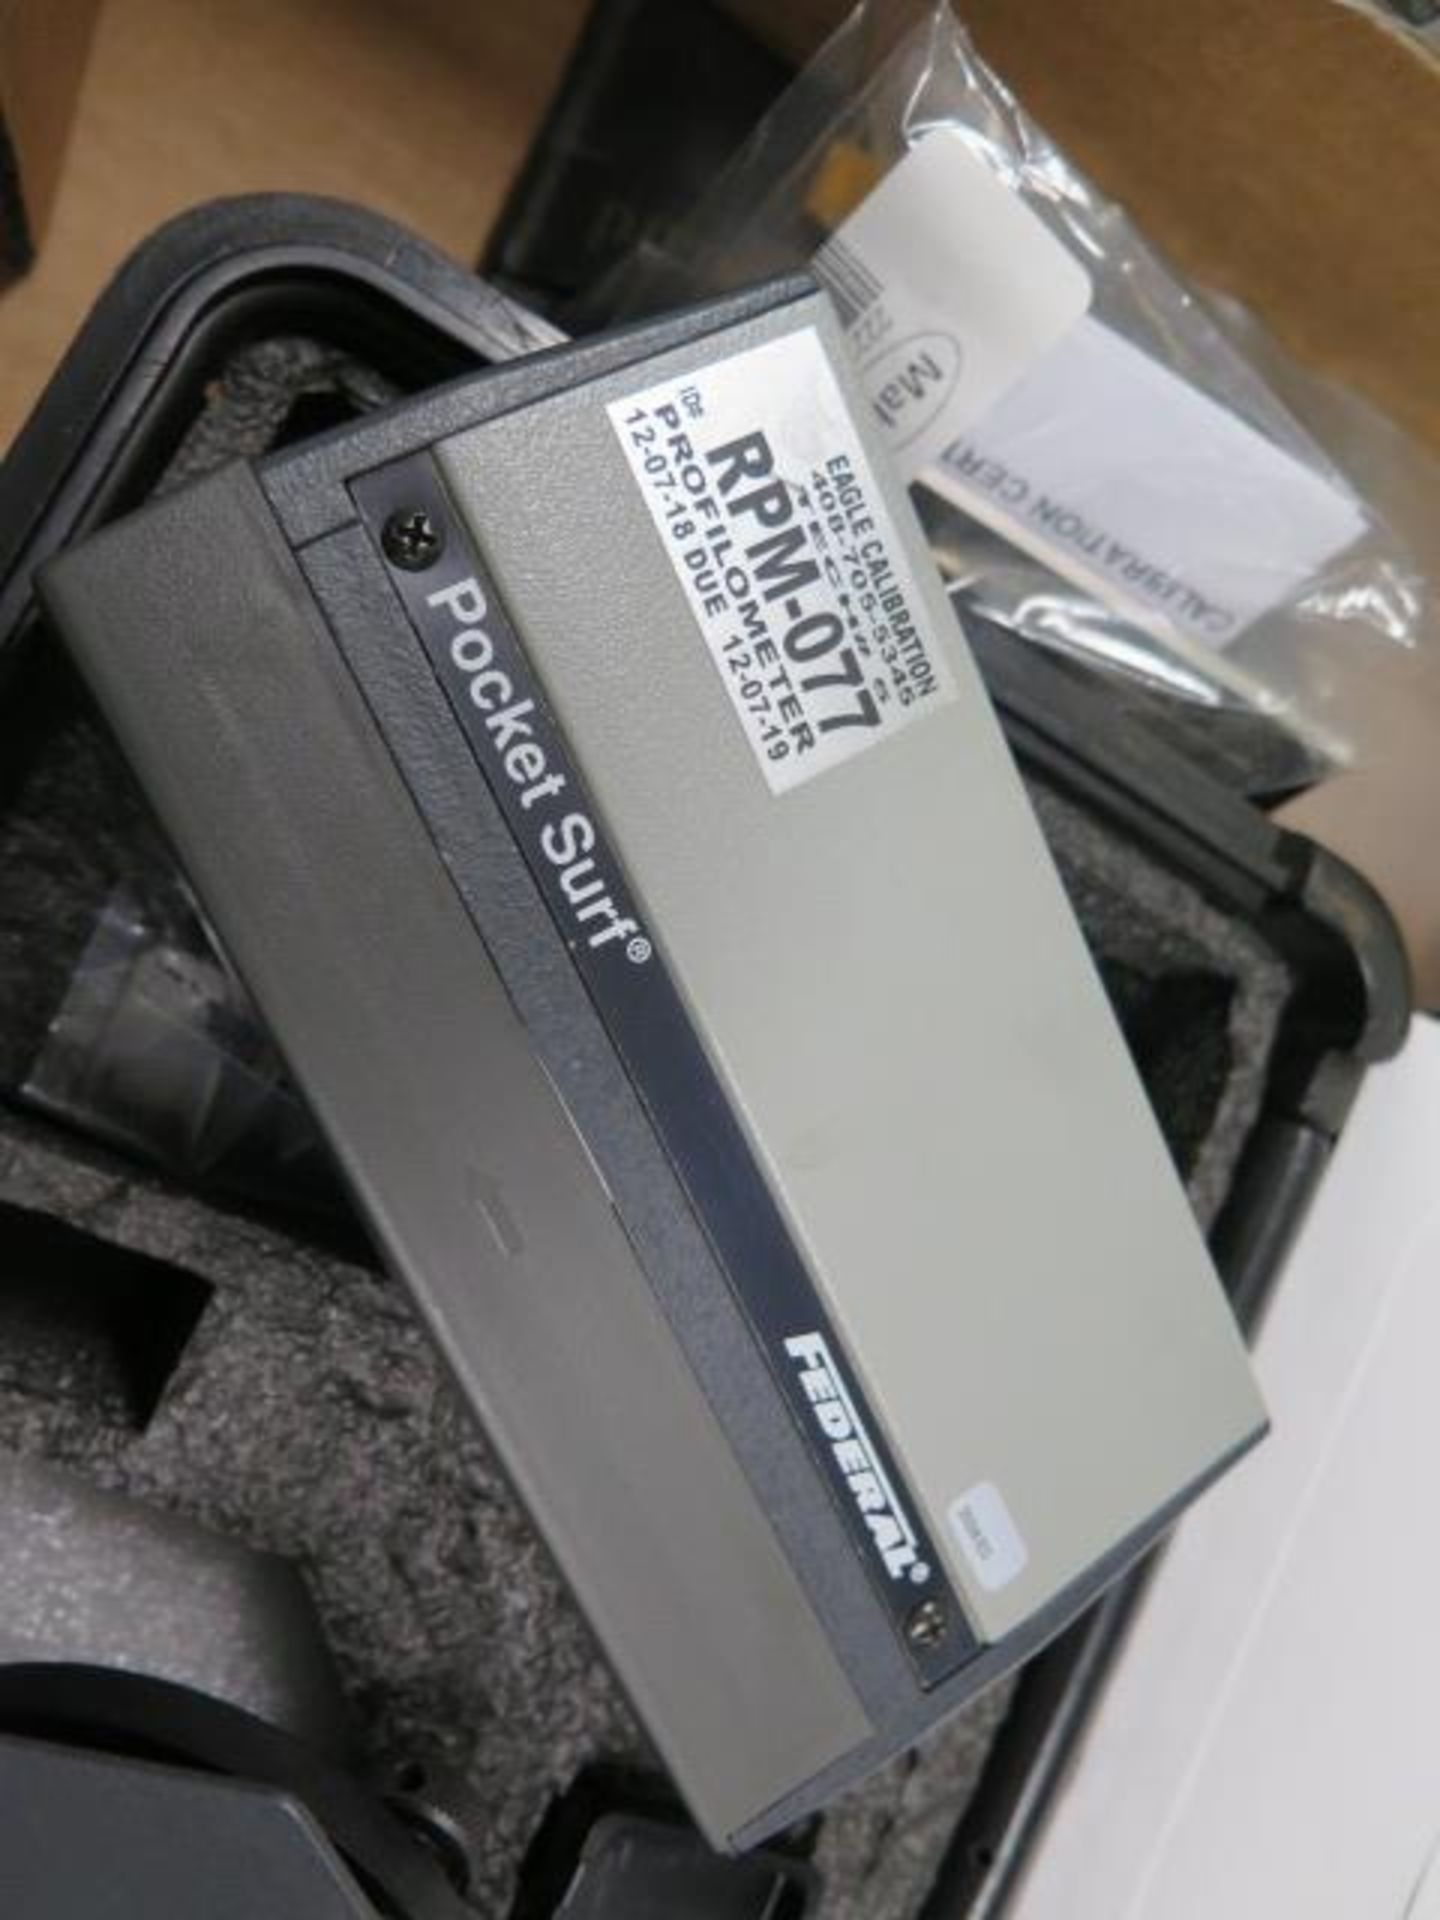 Federal “Pocket Surf” Digital Surface Roughness Gage (SOLD AS-IS - NO WARRANTY) - Image 3 of 5